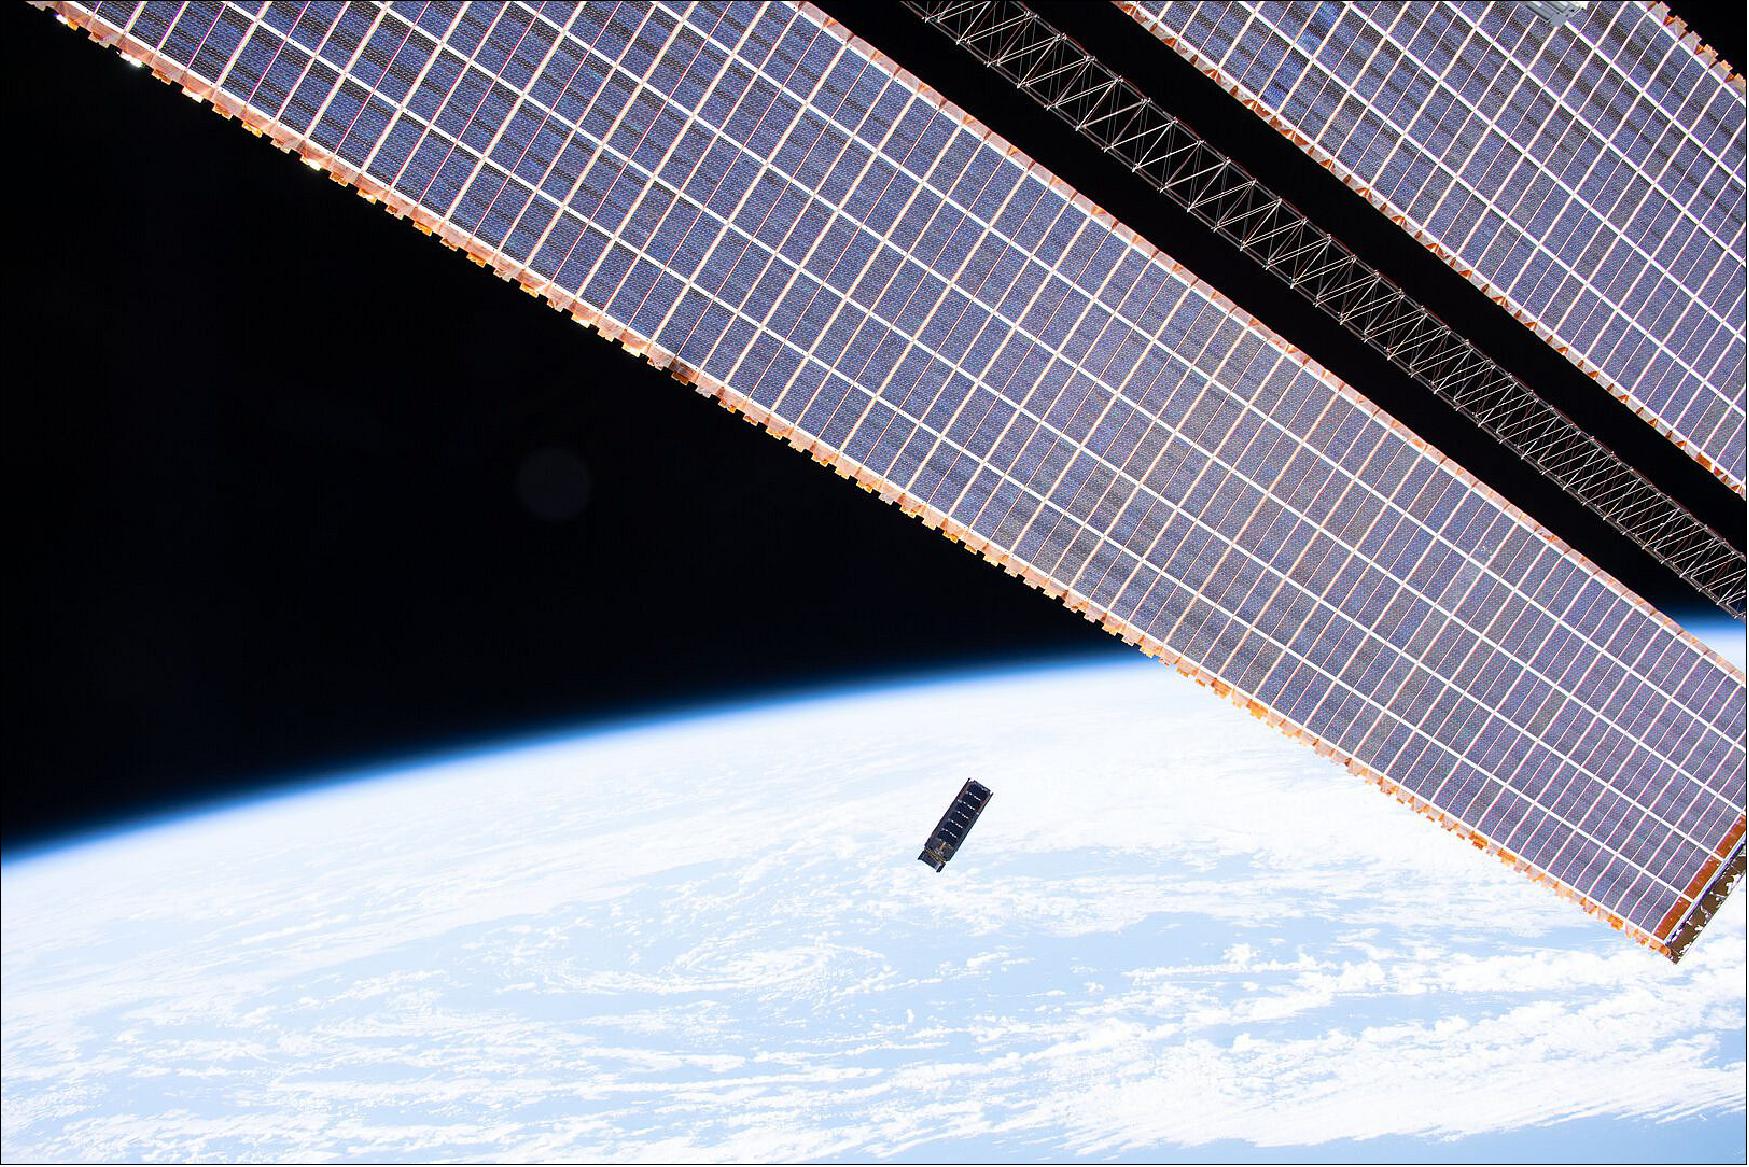 Figure 3: The moment ESA's latest mission left the International Space Station: the Qarman reentry CubeSat developed with Belgium's Von Karman Institute was deployed by NASA astronaut Andrew 'Drew' Morgan via a Nanoracks dispenser on 19 February 2020. Qarman will now fall gradually to Earth, to eventually gather valuable data on atmospheric reentry physics (image credit: NASA)